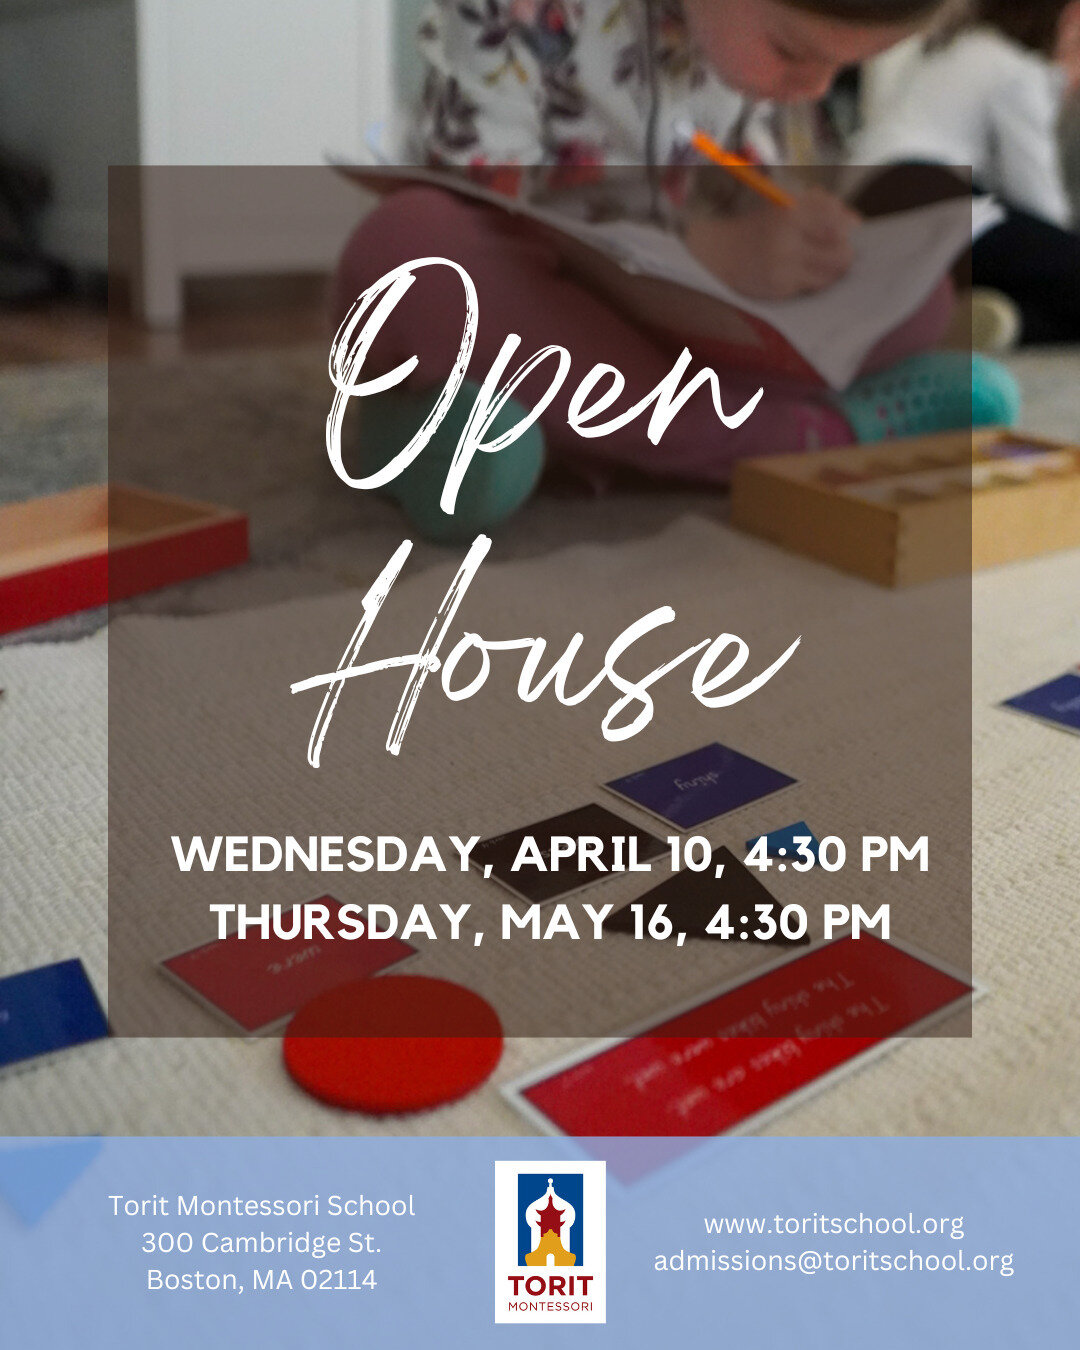 🌷 Spring Open House dates are on the calendar! 🌼

Torit Montessori School invites you to learn more about our unique approach to Montessori education at our upcoming Spring Open Houses. 🌟✨

🗓️ Mark your calendars:
🌸 Wednesday, April 10th, 4:30-5